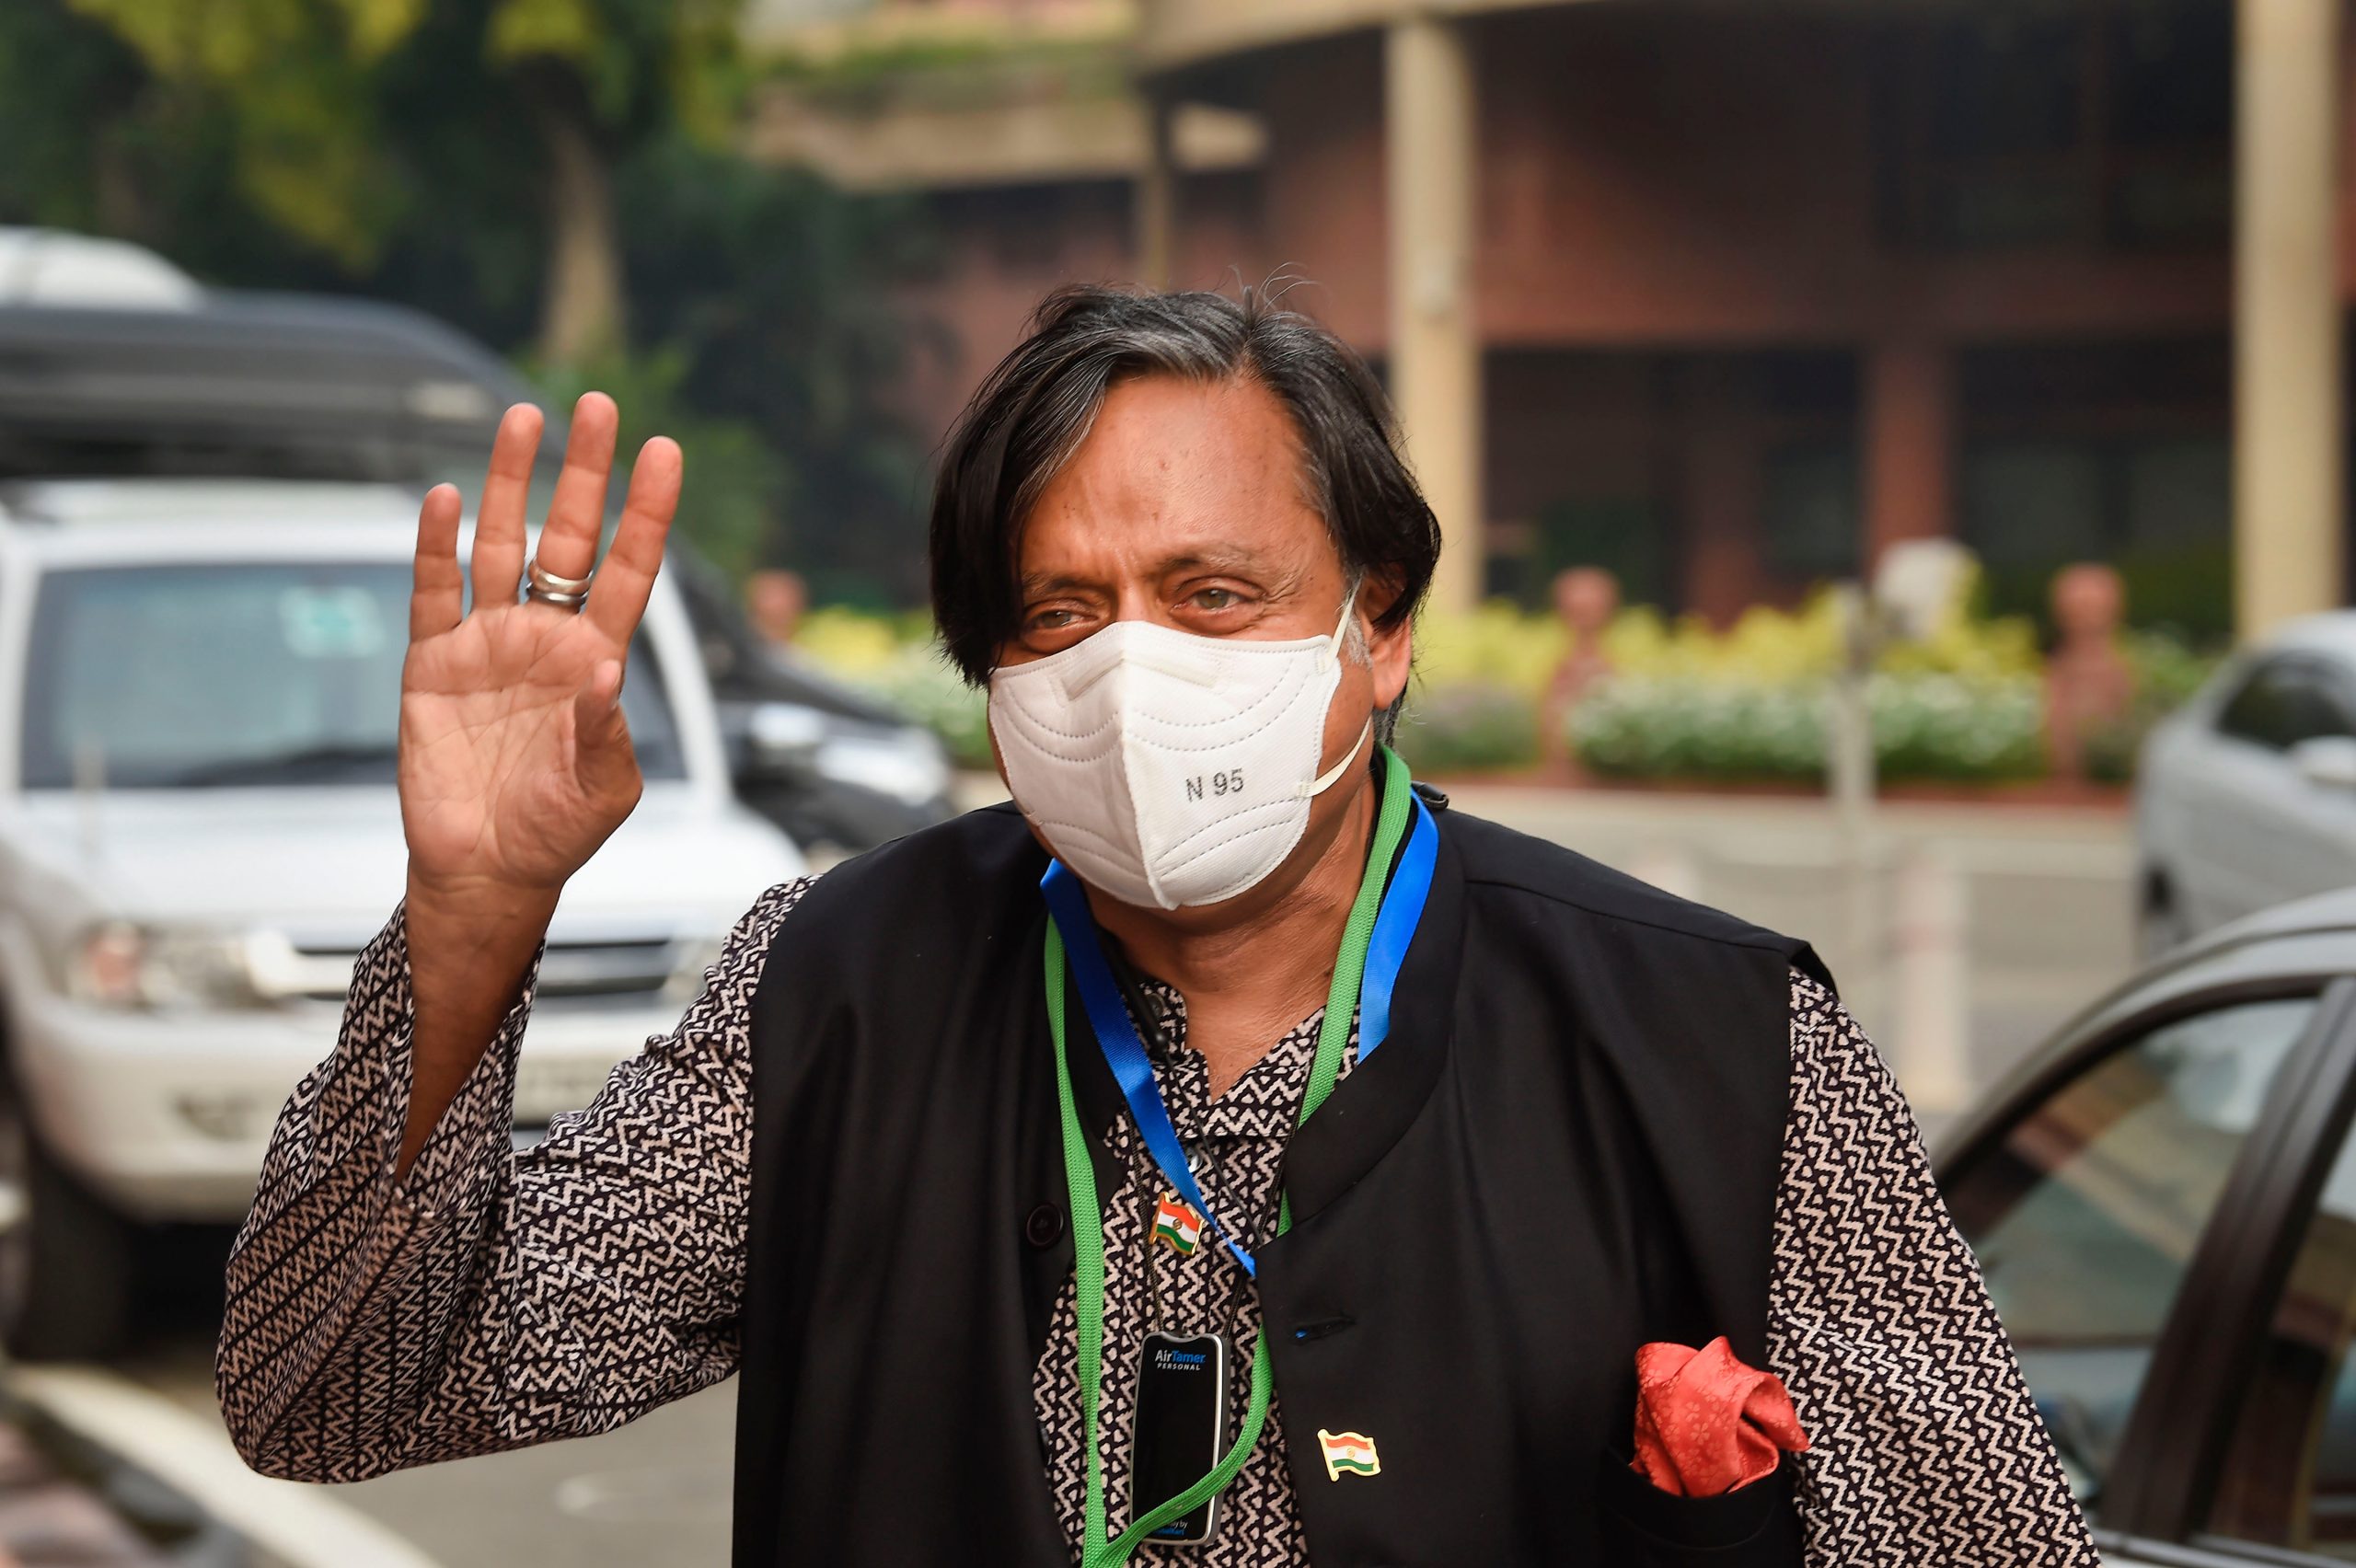 Sympathy earned from failure: Shashi Tharoor slams govt over COVID foreign aid